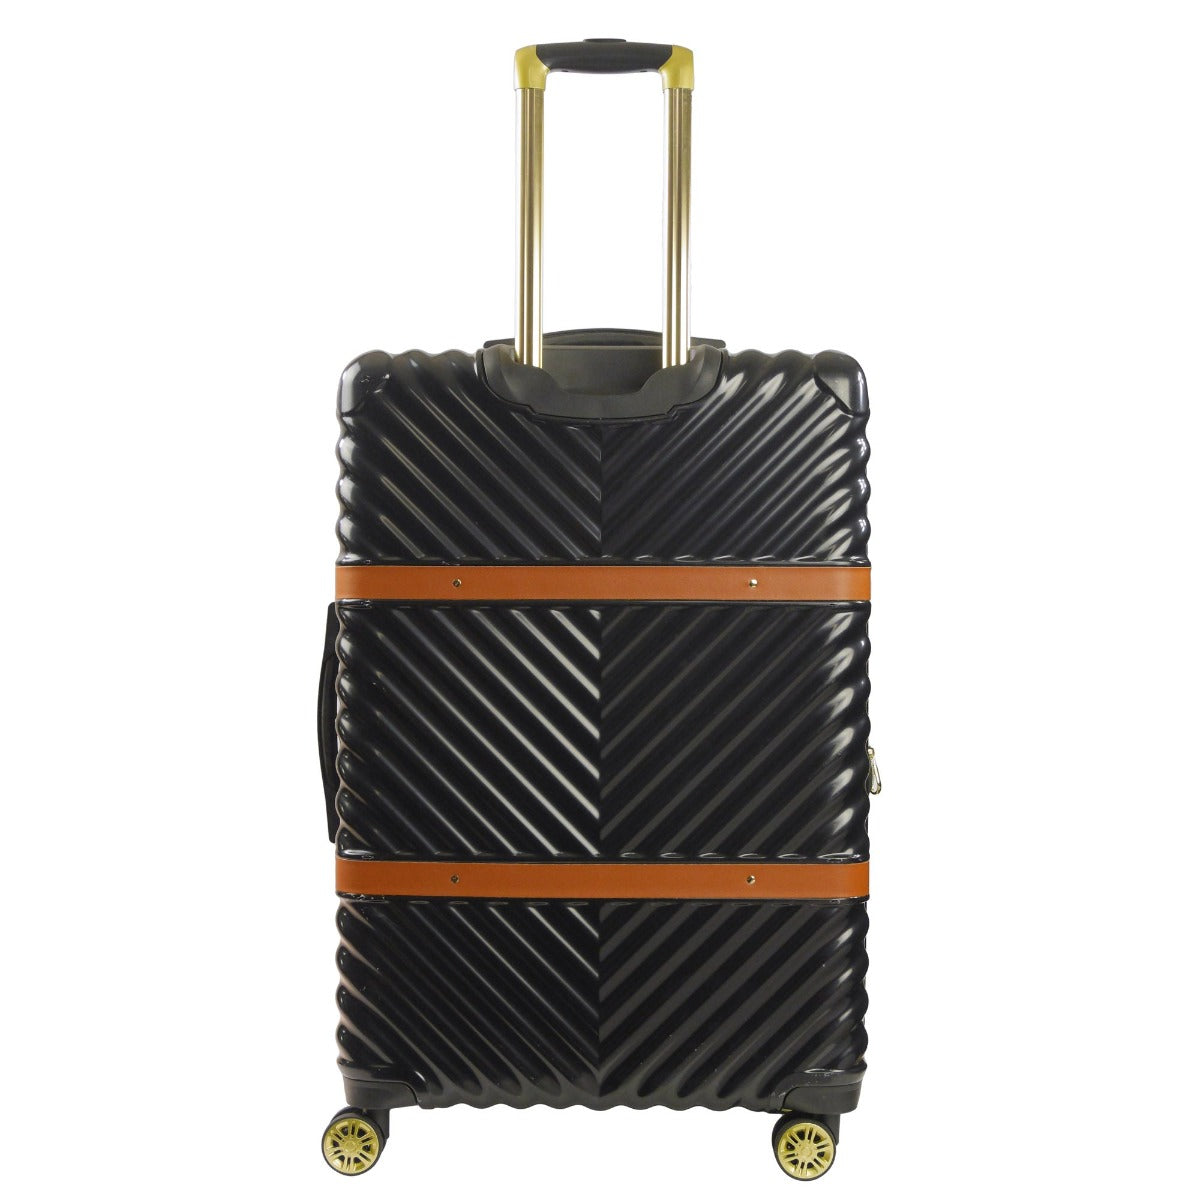 Christian Siriano New York Stella 29" black hardside spinner suitcase - best durable luggage for travelling